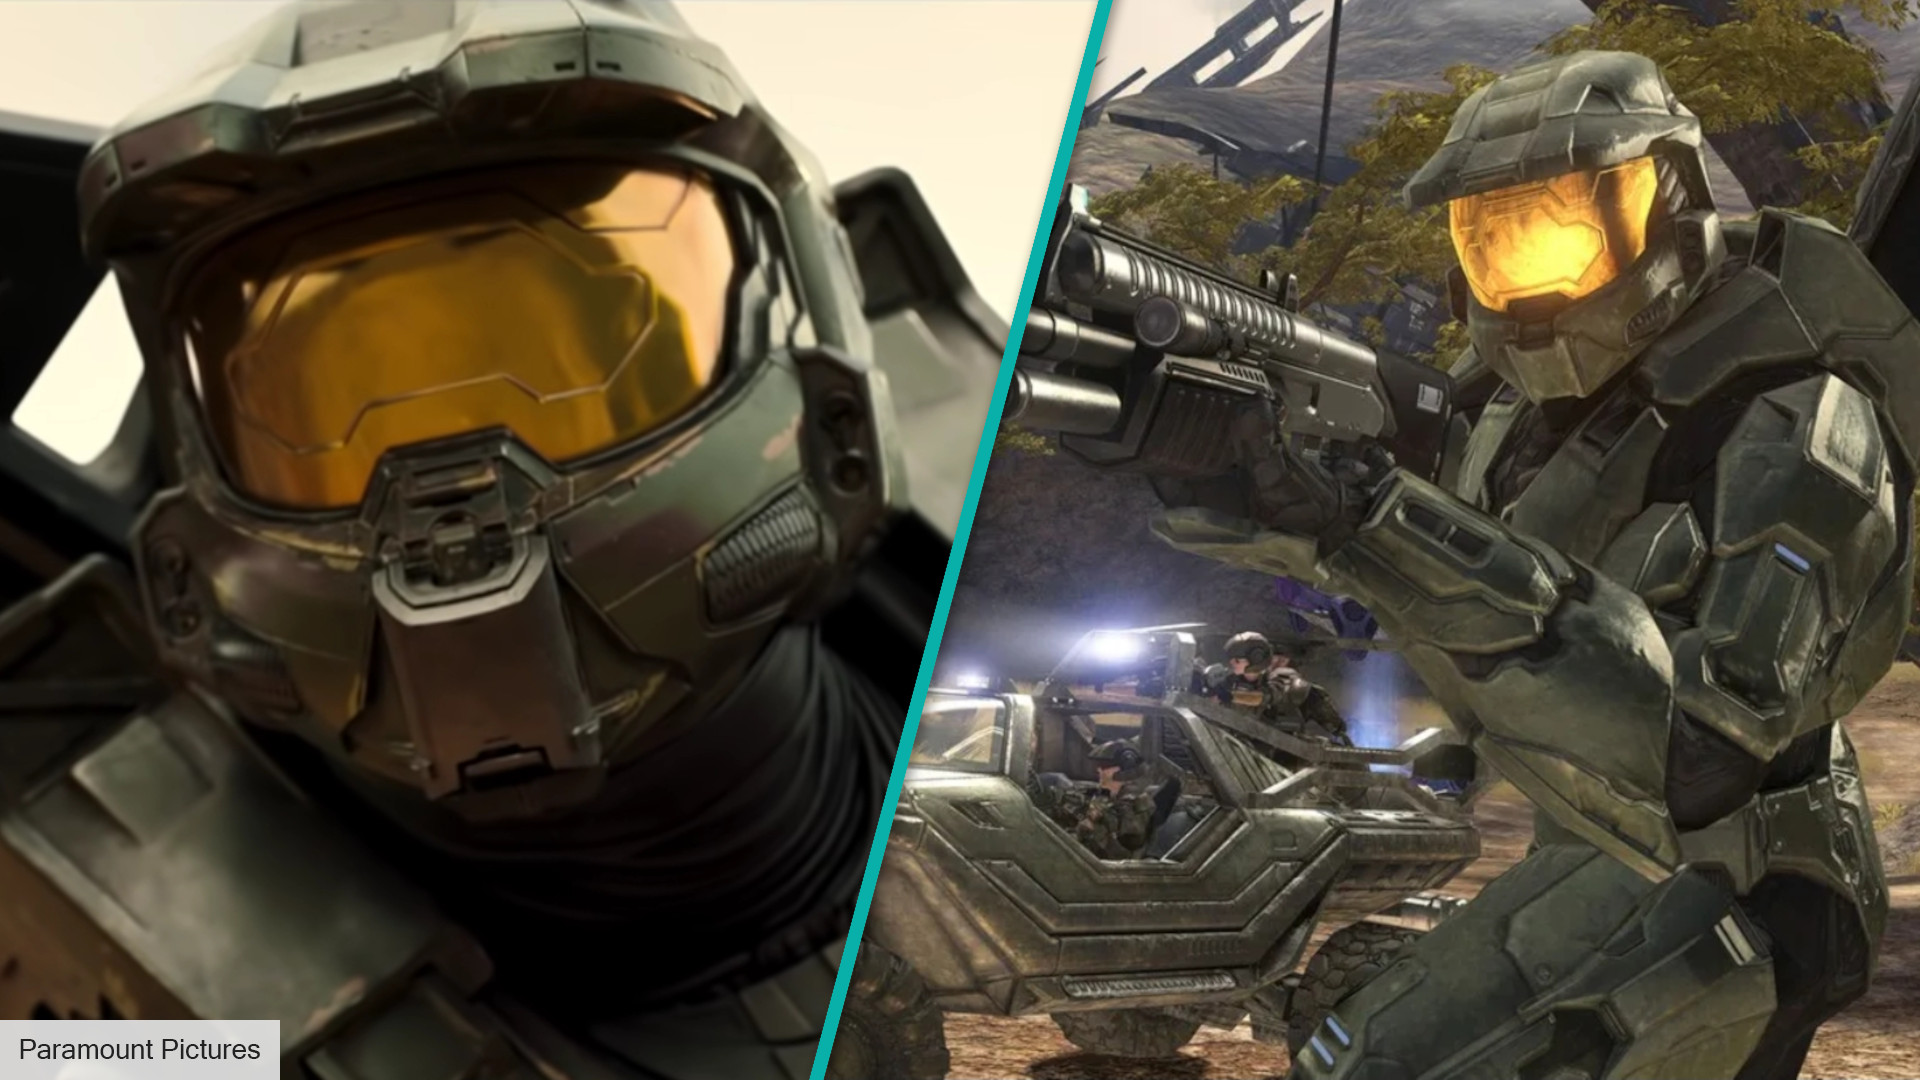 Halo TV Show Trailer Brings Master Chief Into Live-Action for